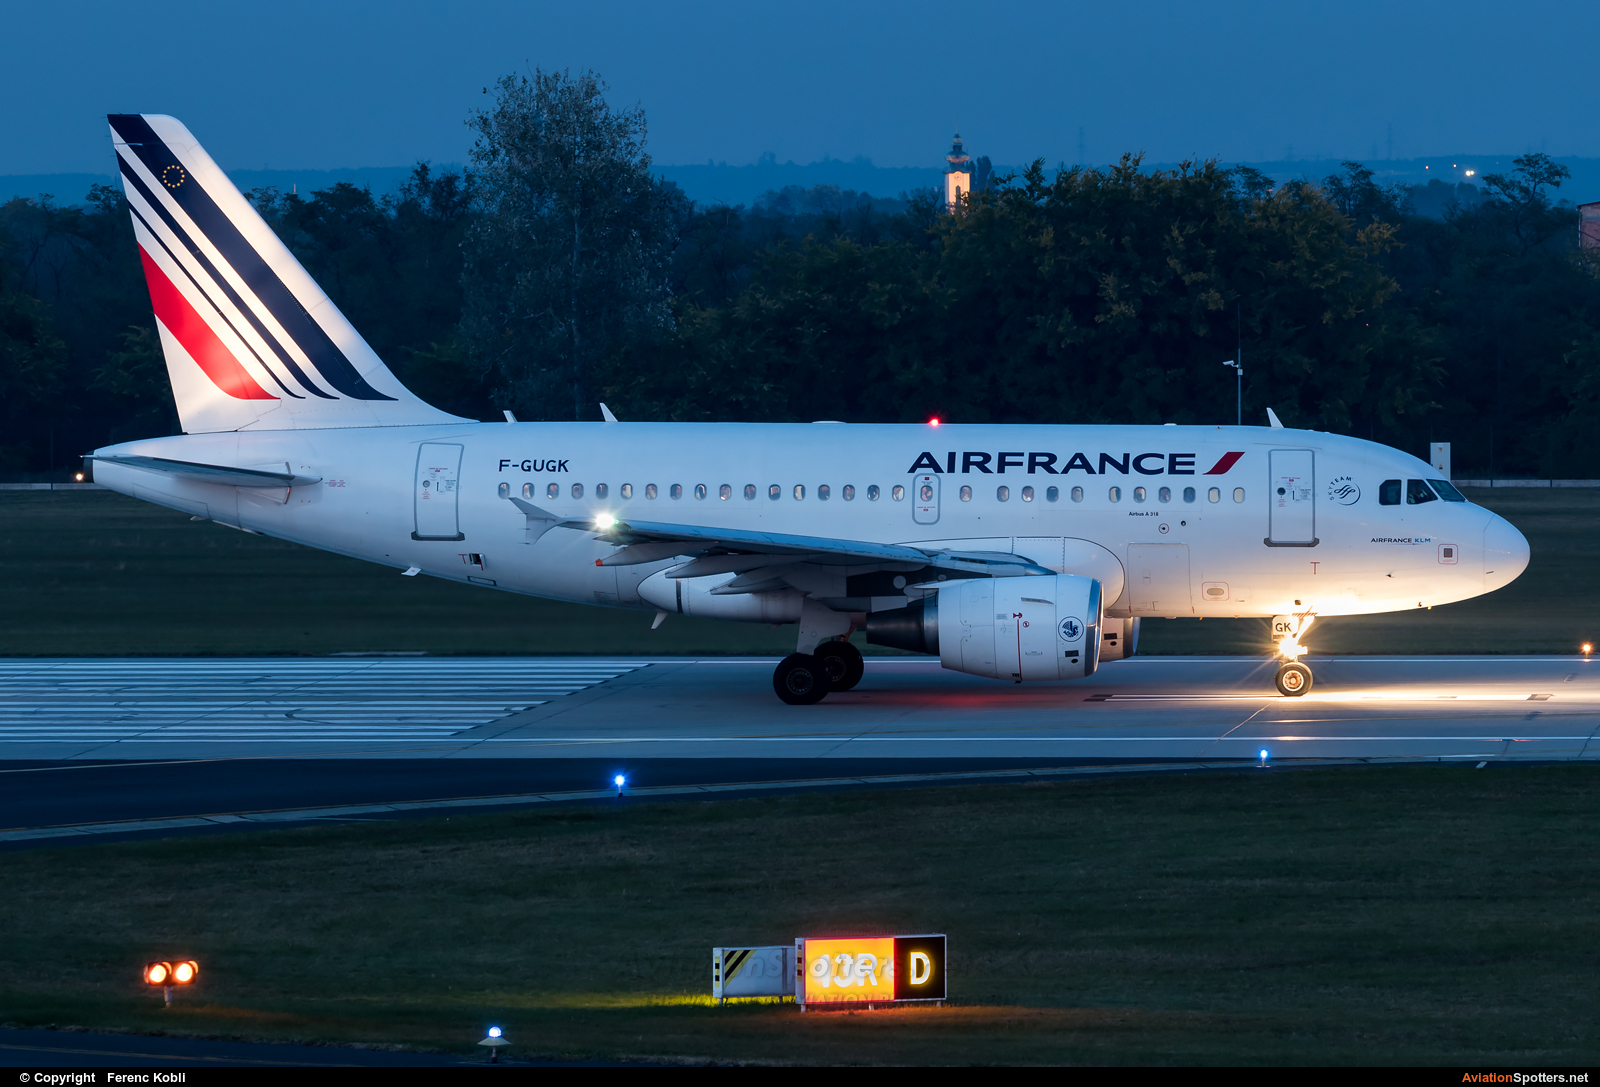 Air France  -  A318  (F-GUGK) By Ferenc Kobli (kisocsike)